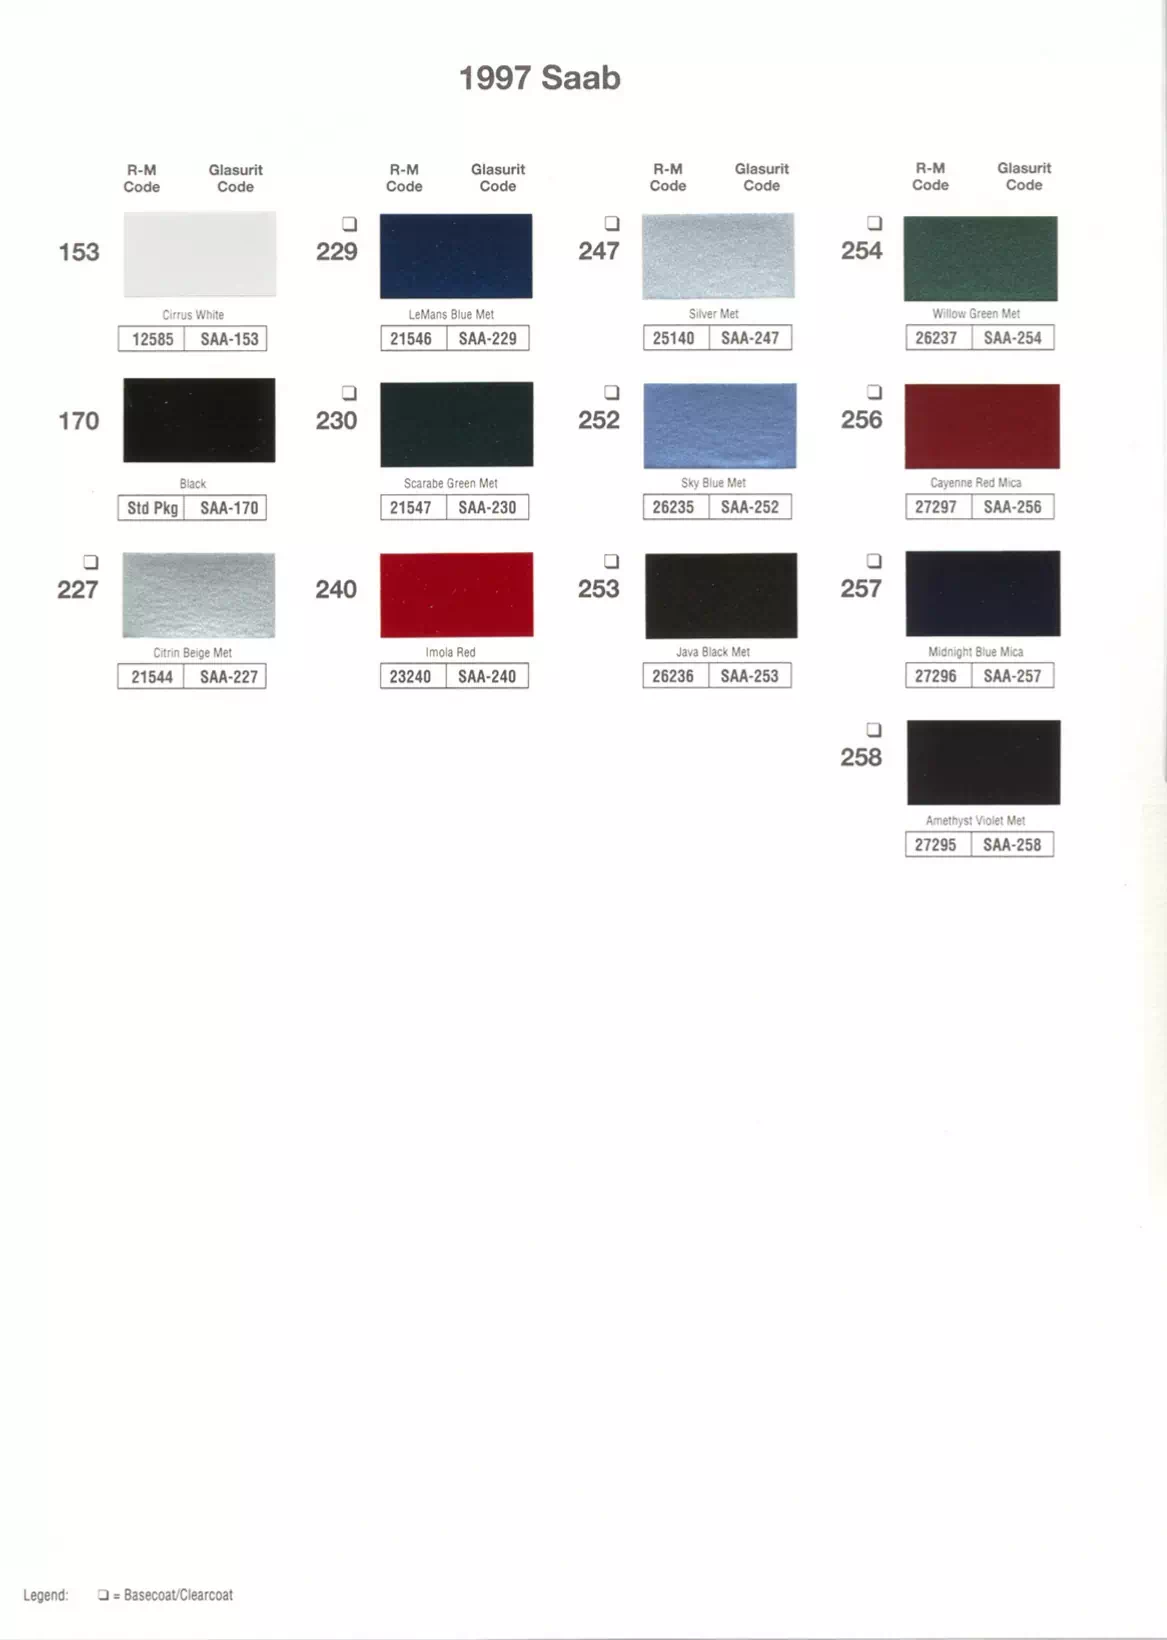 Paint chips of exterior paint colors for Saab vehicles and their ordering paint codes